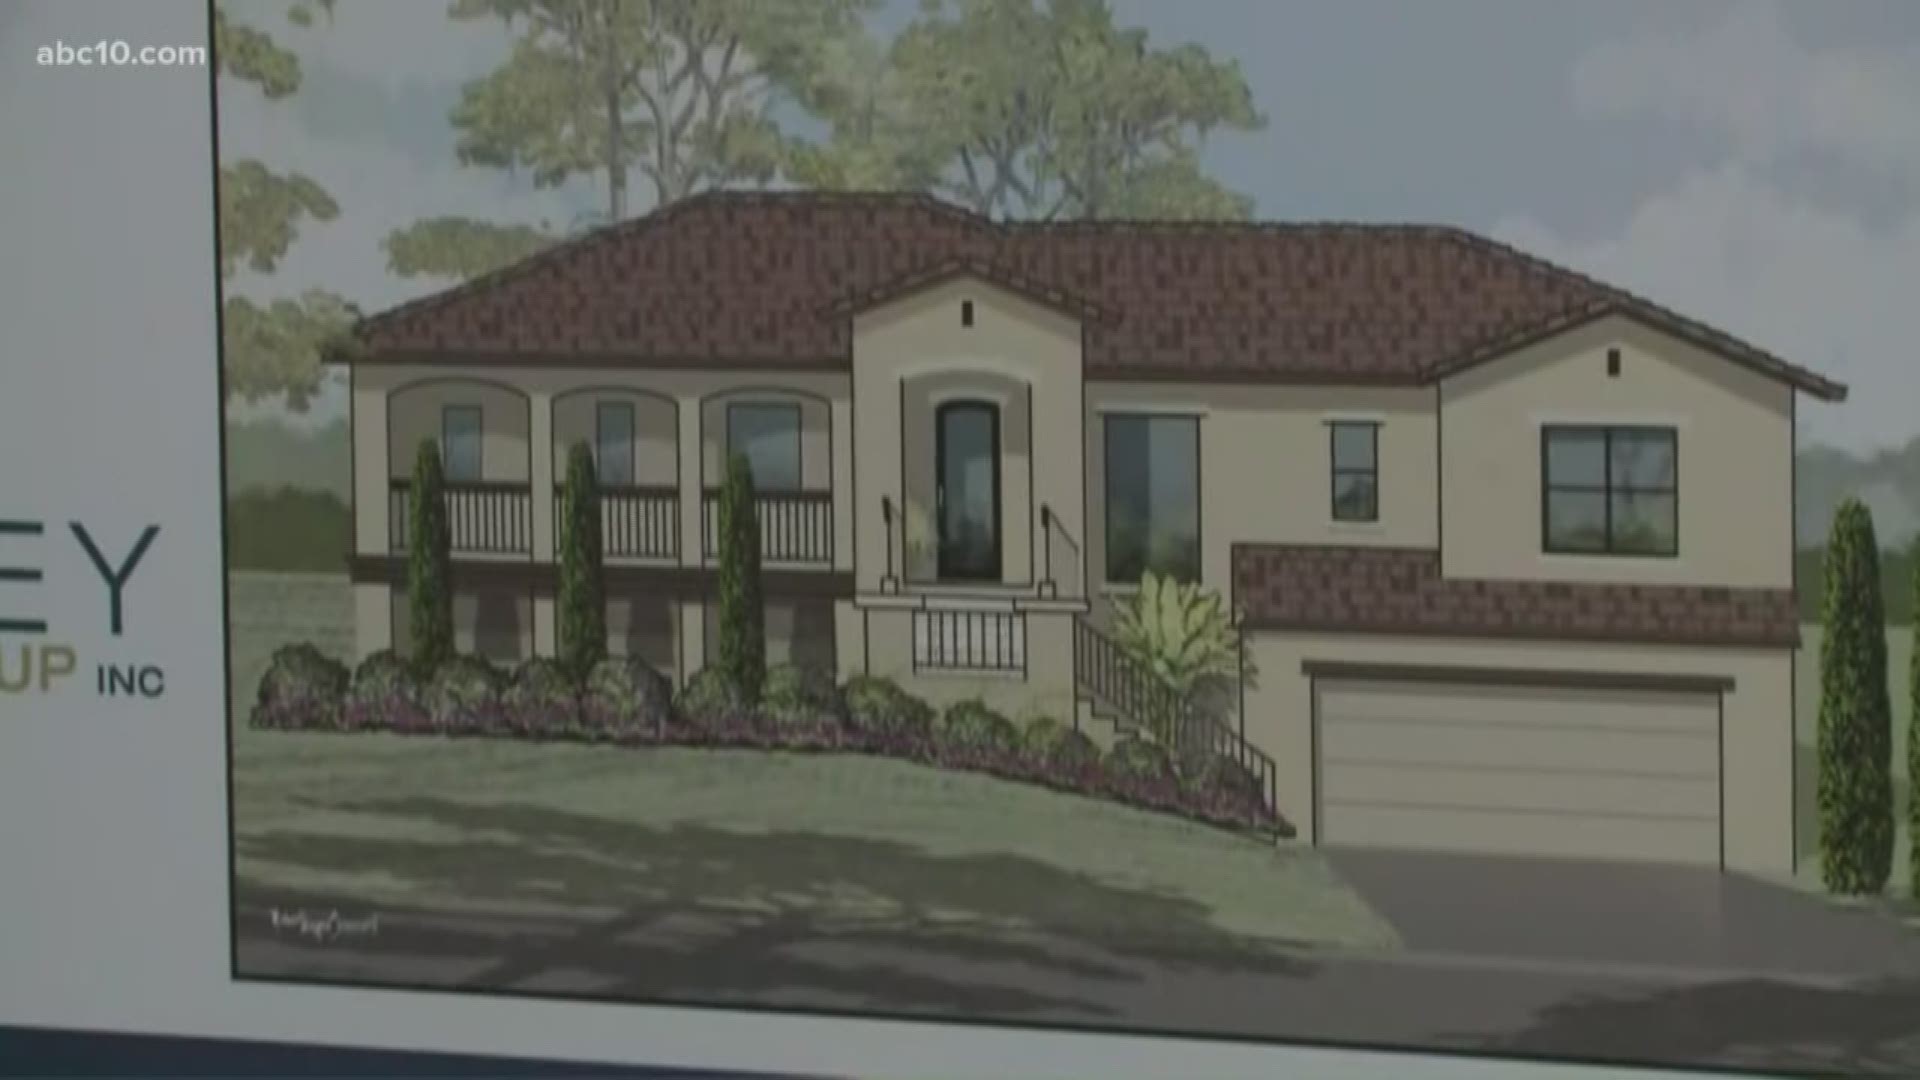 Mark S. Allen is live in Cameron Park where St. Jude Children's Hospital is about to build somebody a dream home.